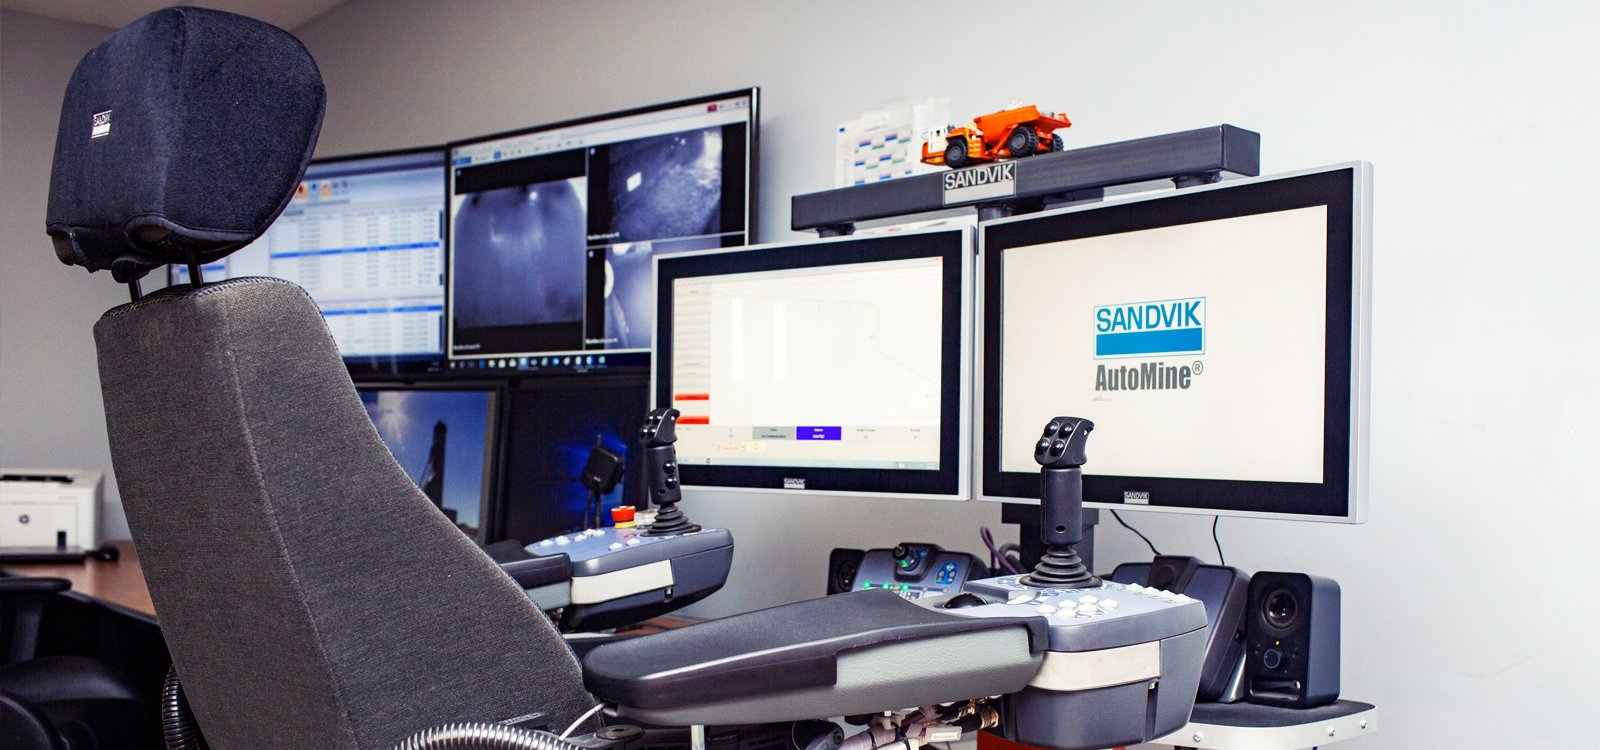 From the comfort of the purpose-built control room, operators can control remotes for loading chutes and rock breakers.